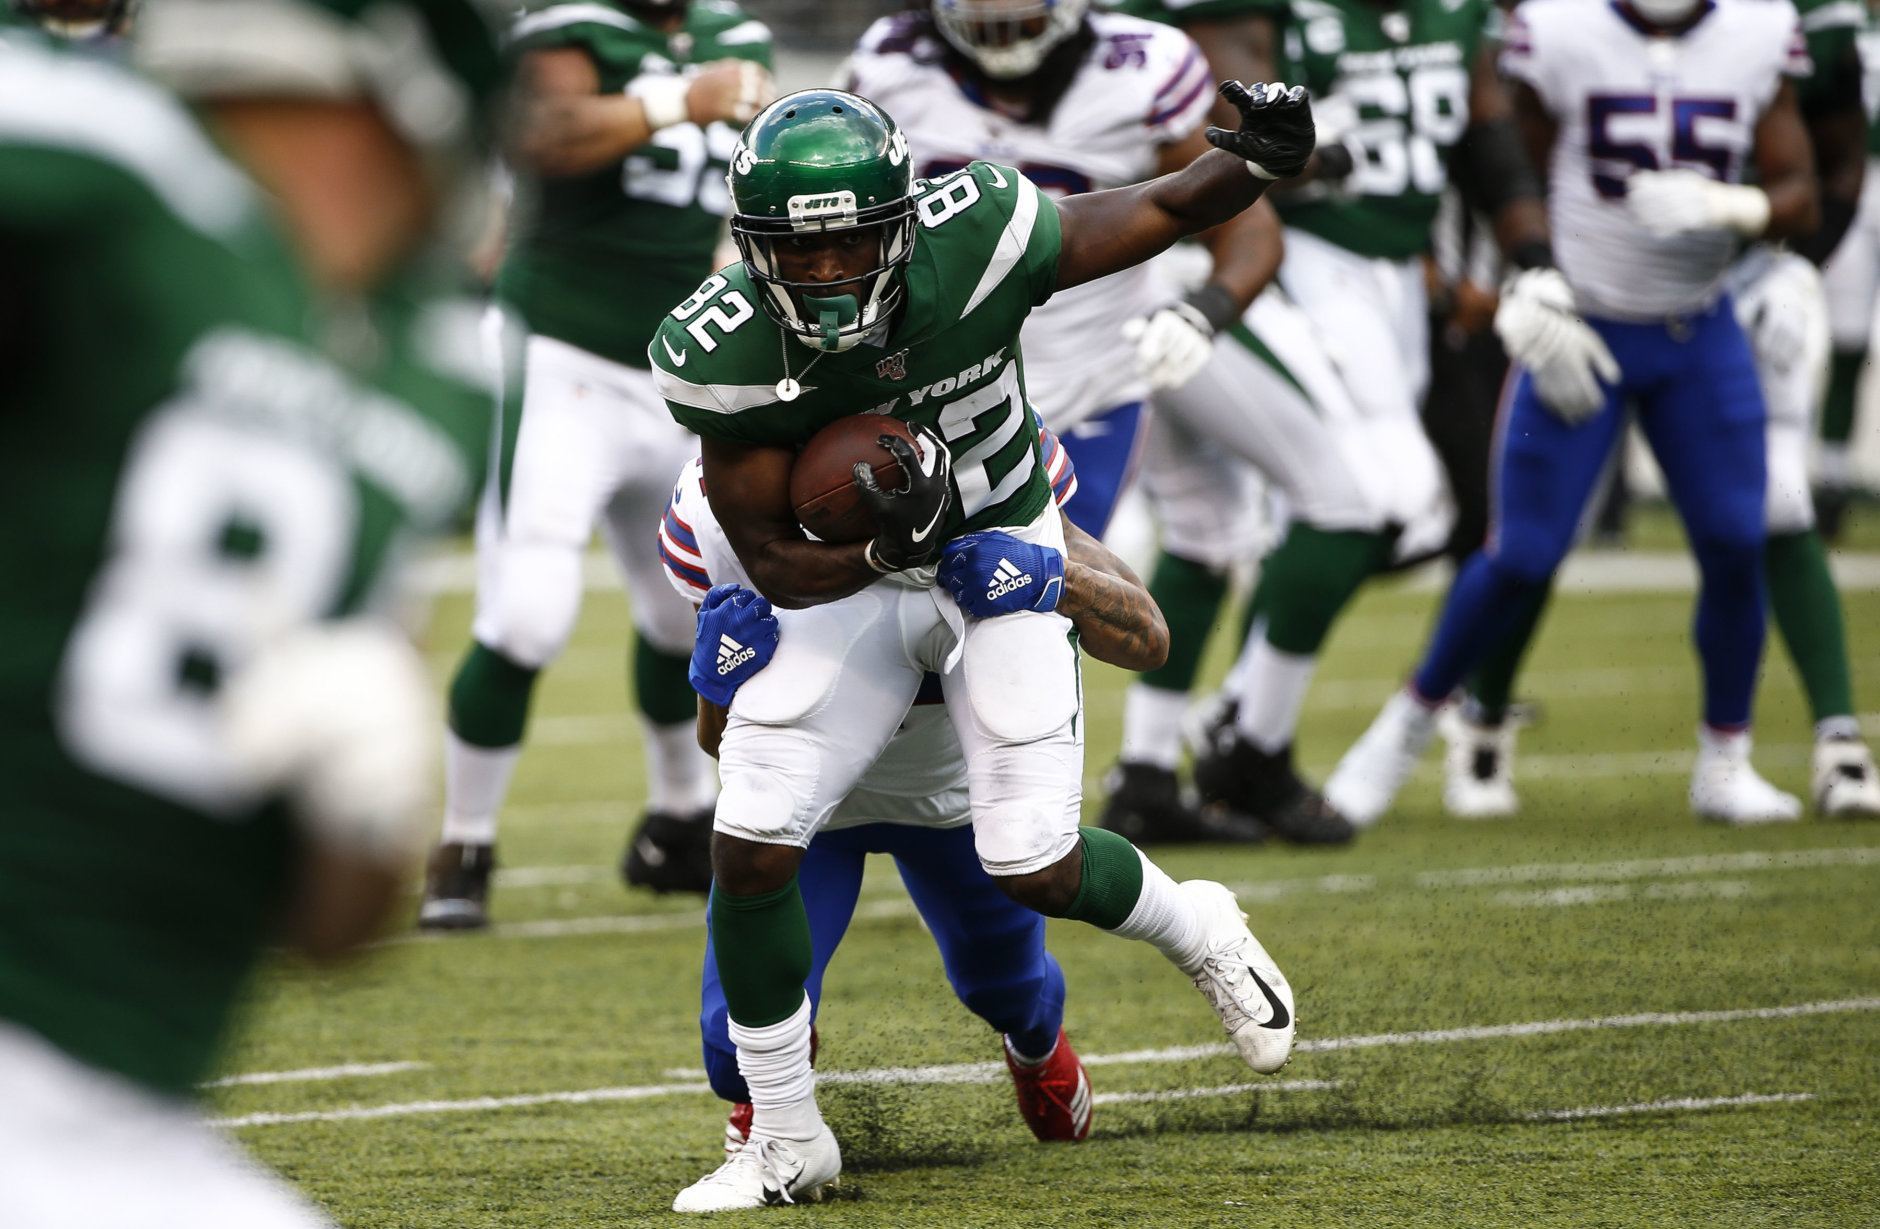 <p><b><i>Bills 17</i></b><br />
<b><i>Jets 16</i></b></p>
<p>Not to be outdone, the much-hyped Jets also lost at home to open the Adam Gase era in Gotham, as Jamison Crowder&#8217;s debut (14 catches, 103 total yards) trumped Le&#8217;Veon Bell&#8217;s (92 yards on 23 touches) and Gregg Williams&#8217; defense couldn&#8217;t hold on to a 16-point second half lead. It&#8217;s fitting that the Jets and Browns will duel next Monday night to avoid a surprising 0-2 start to what was supposed to be a promising season.</p>
